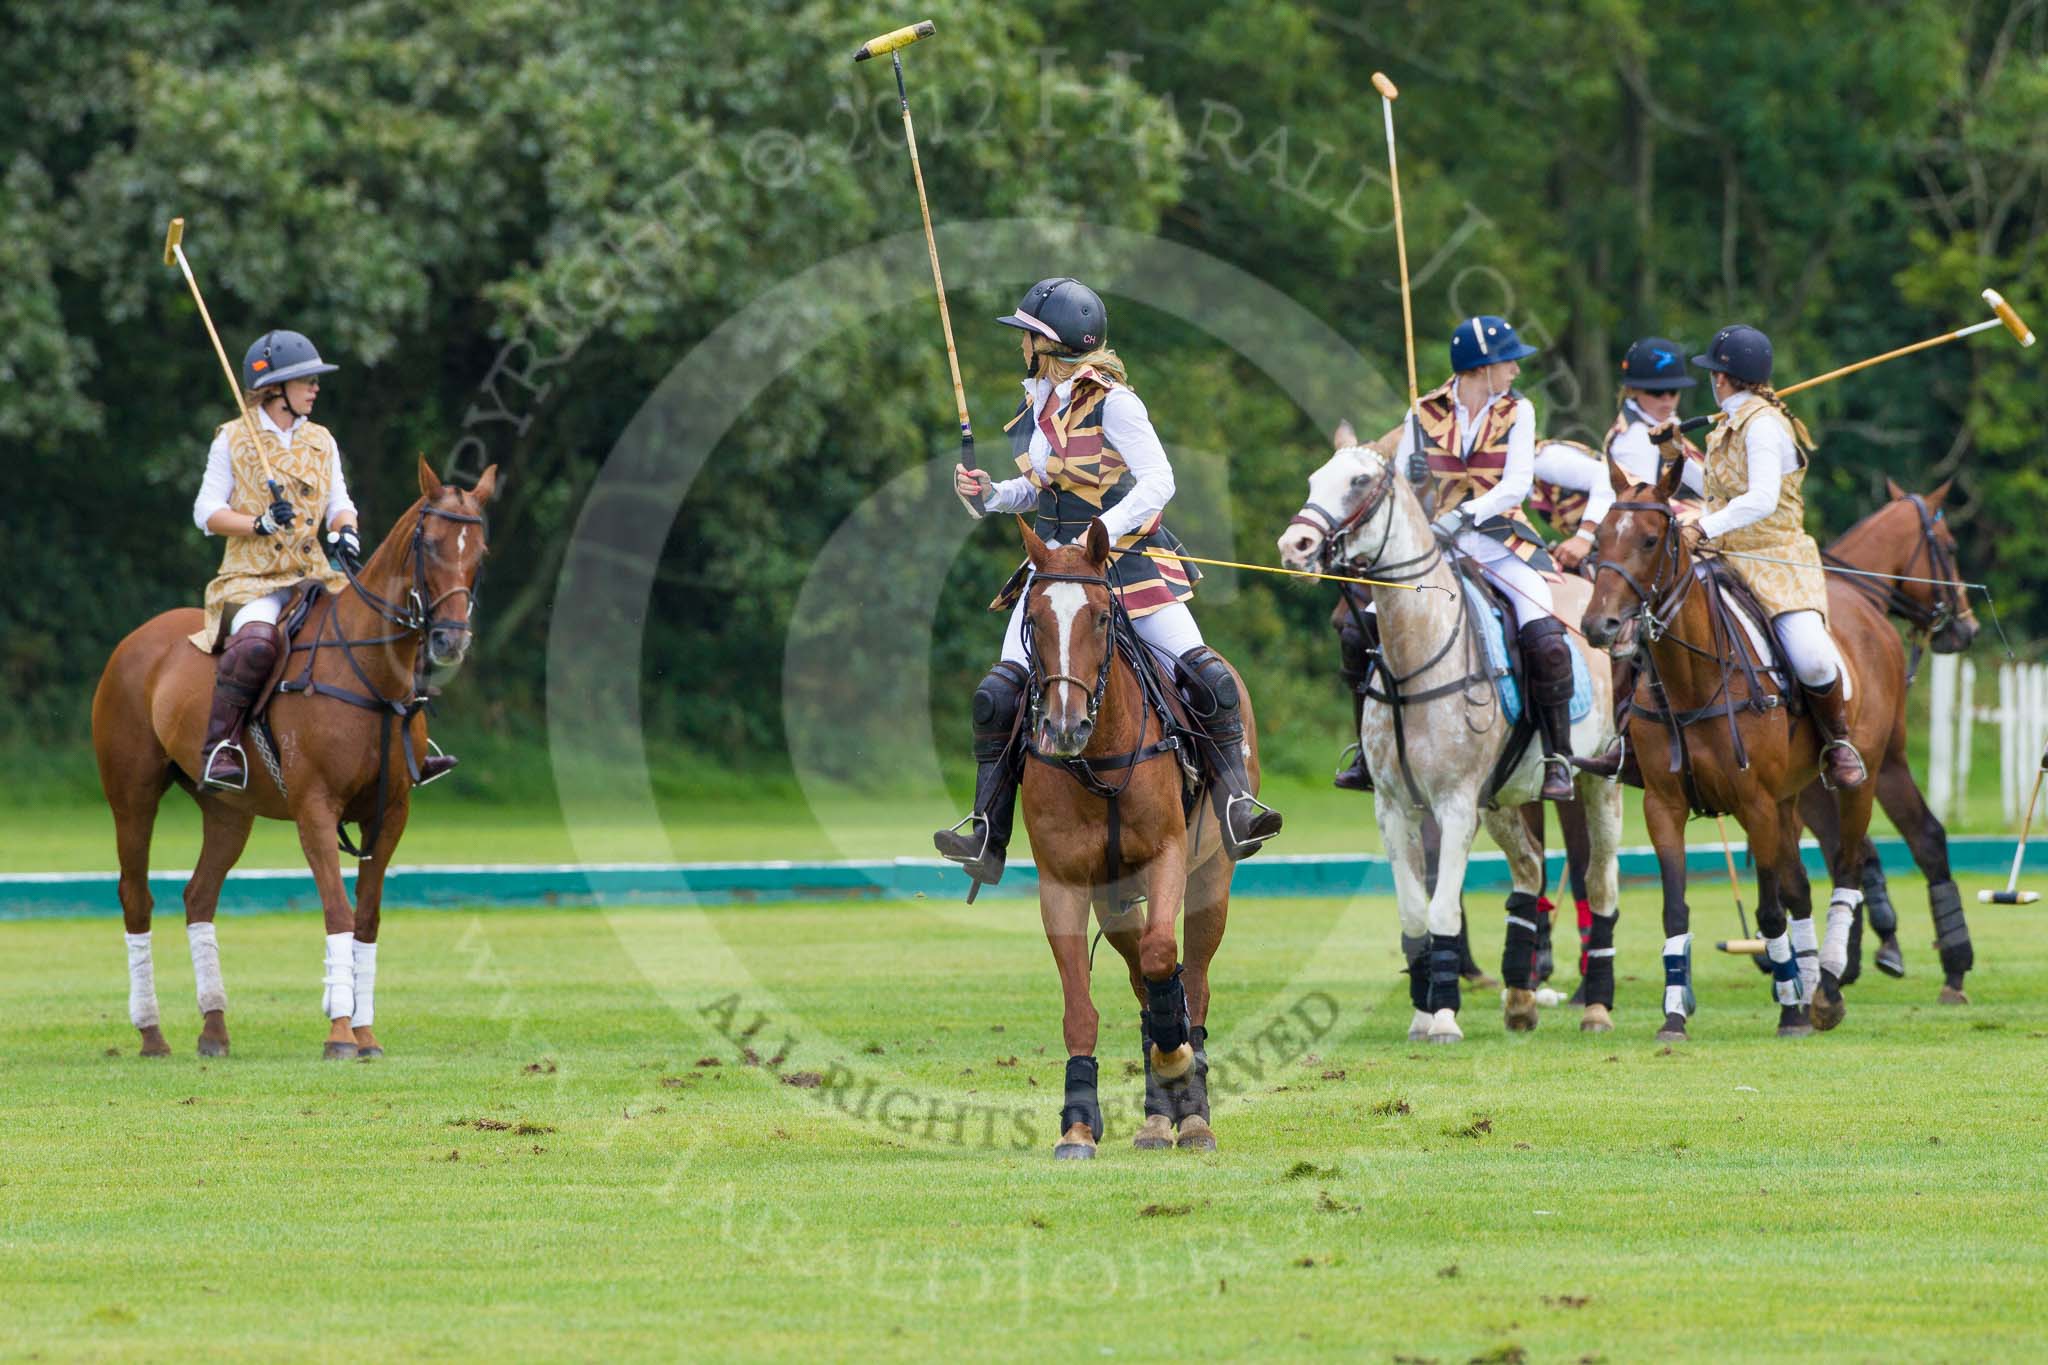 7th Heritage Polo Cup semi-finals: The Game..
Hurtwood Park Polo Club,
Ewhurst Green,
Surrey,
United Kingdom,
on 04 August 2012 at 13:31, image #142